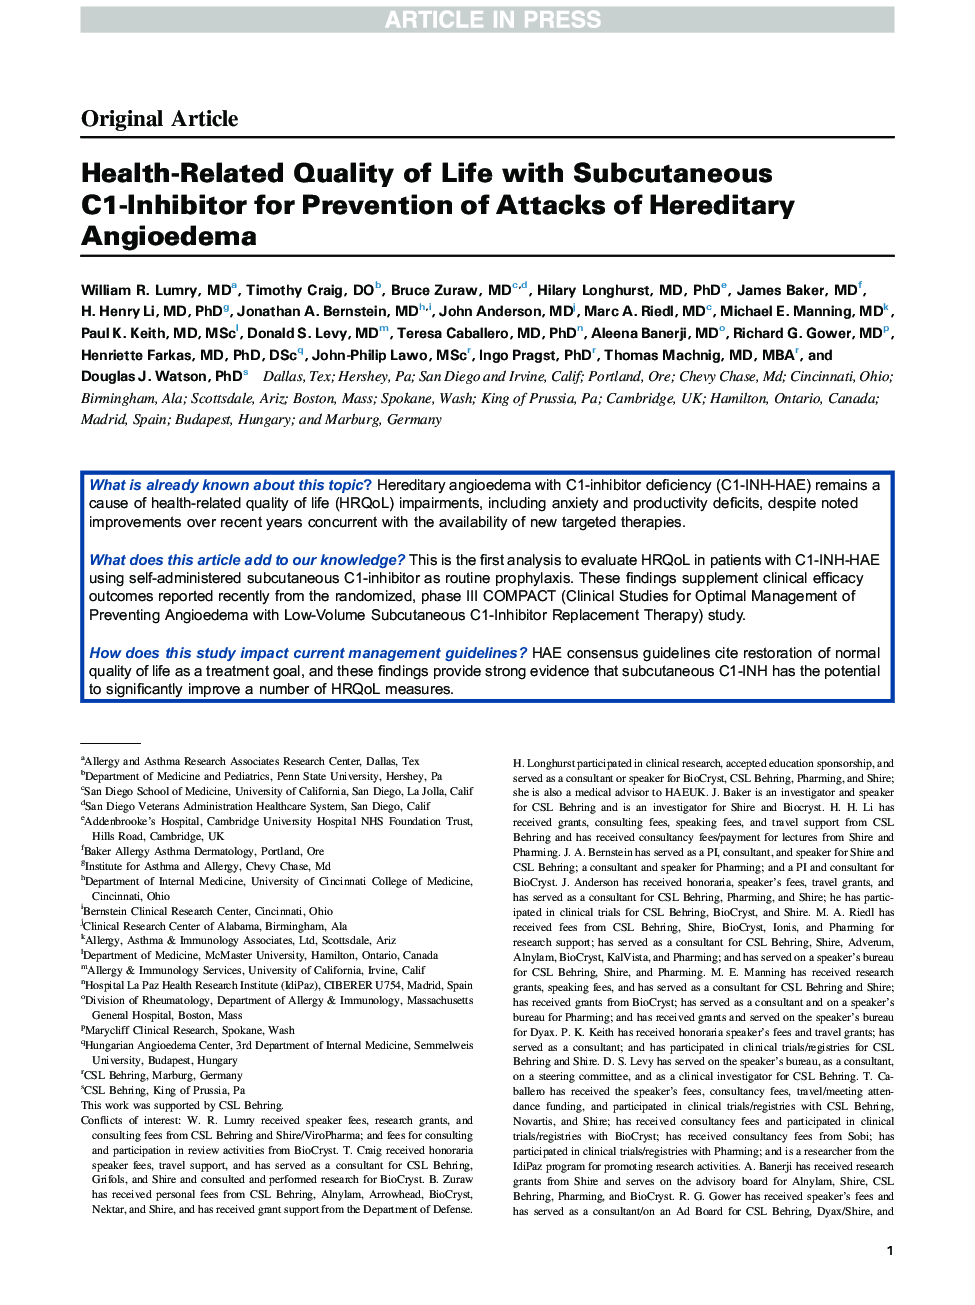 Health-Related Quality of Life with Subcutaneous C1-Inhibitor for Prevention of Attacks of Hereditary Angioedema